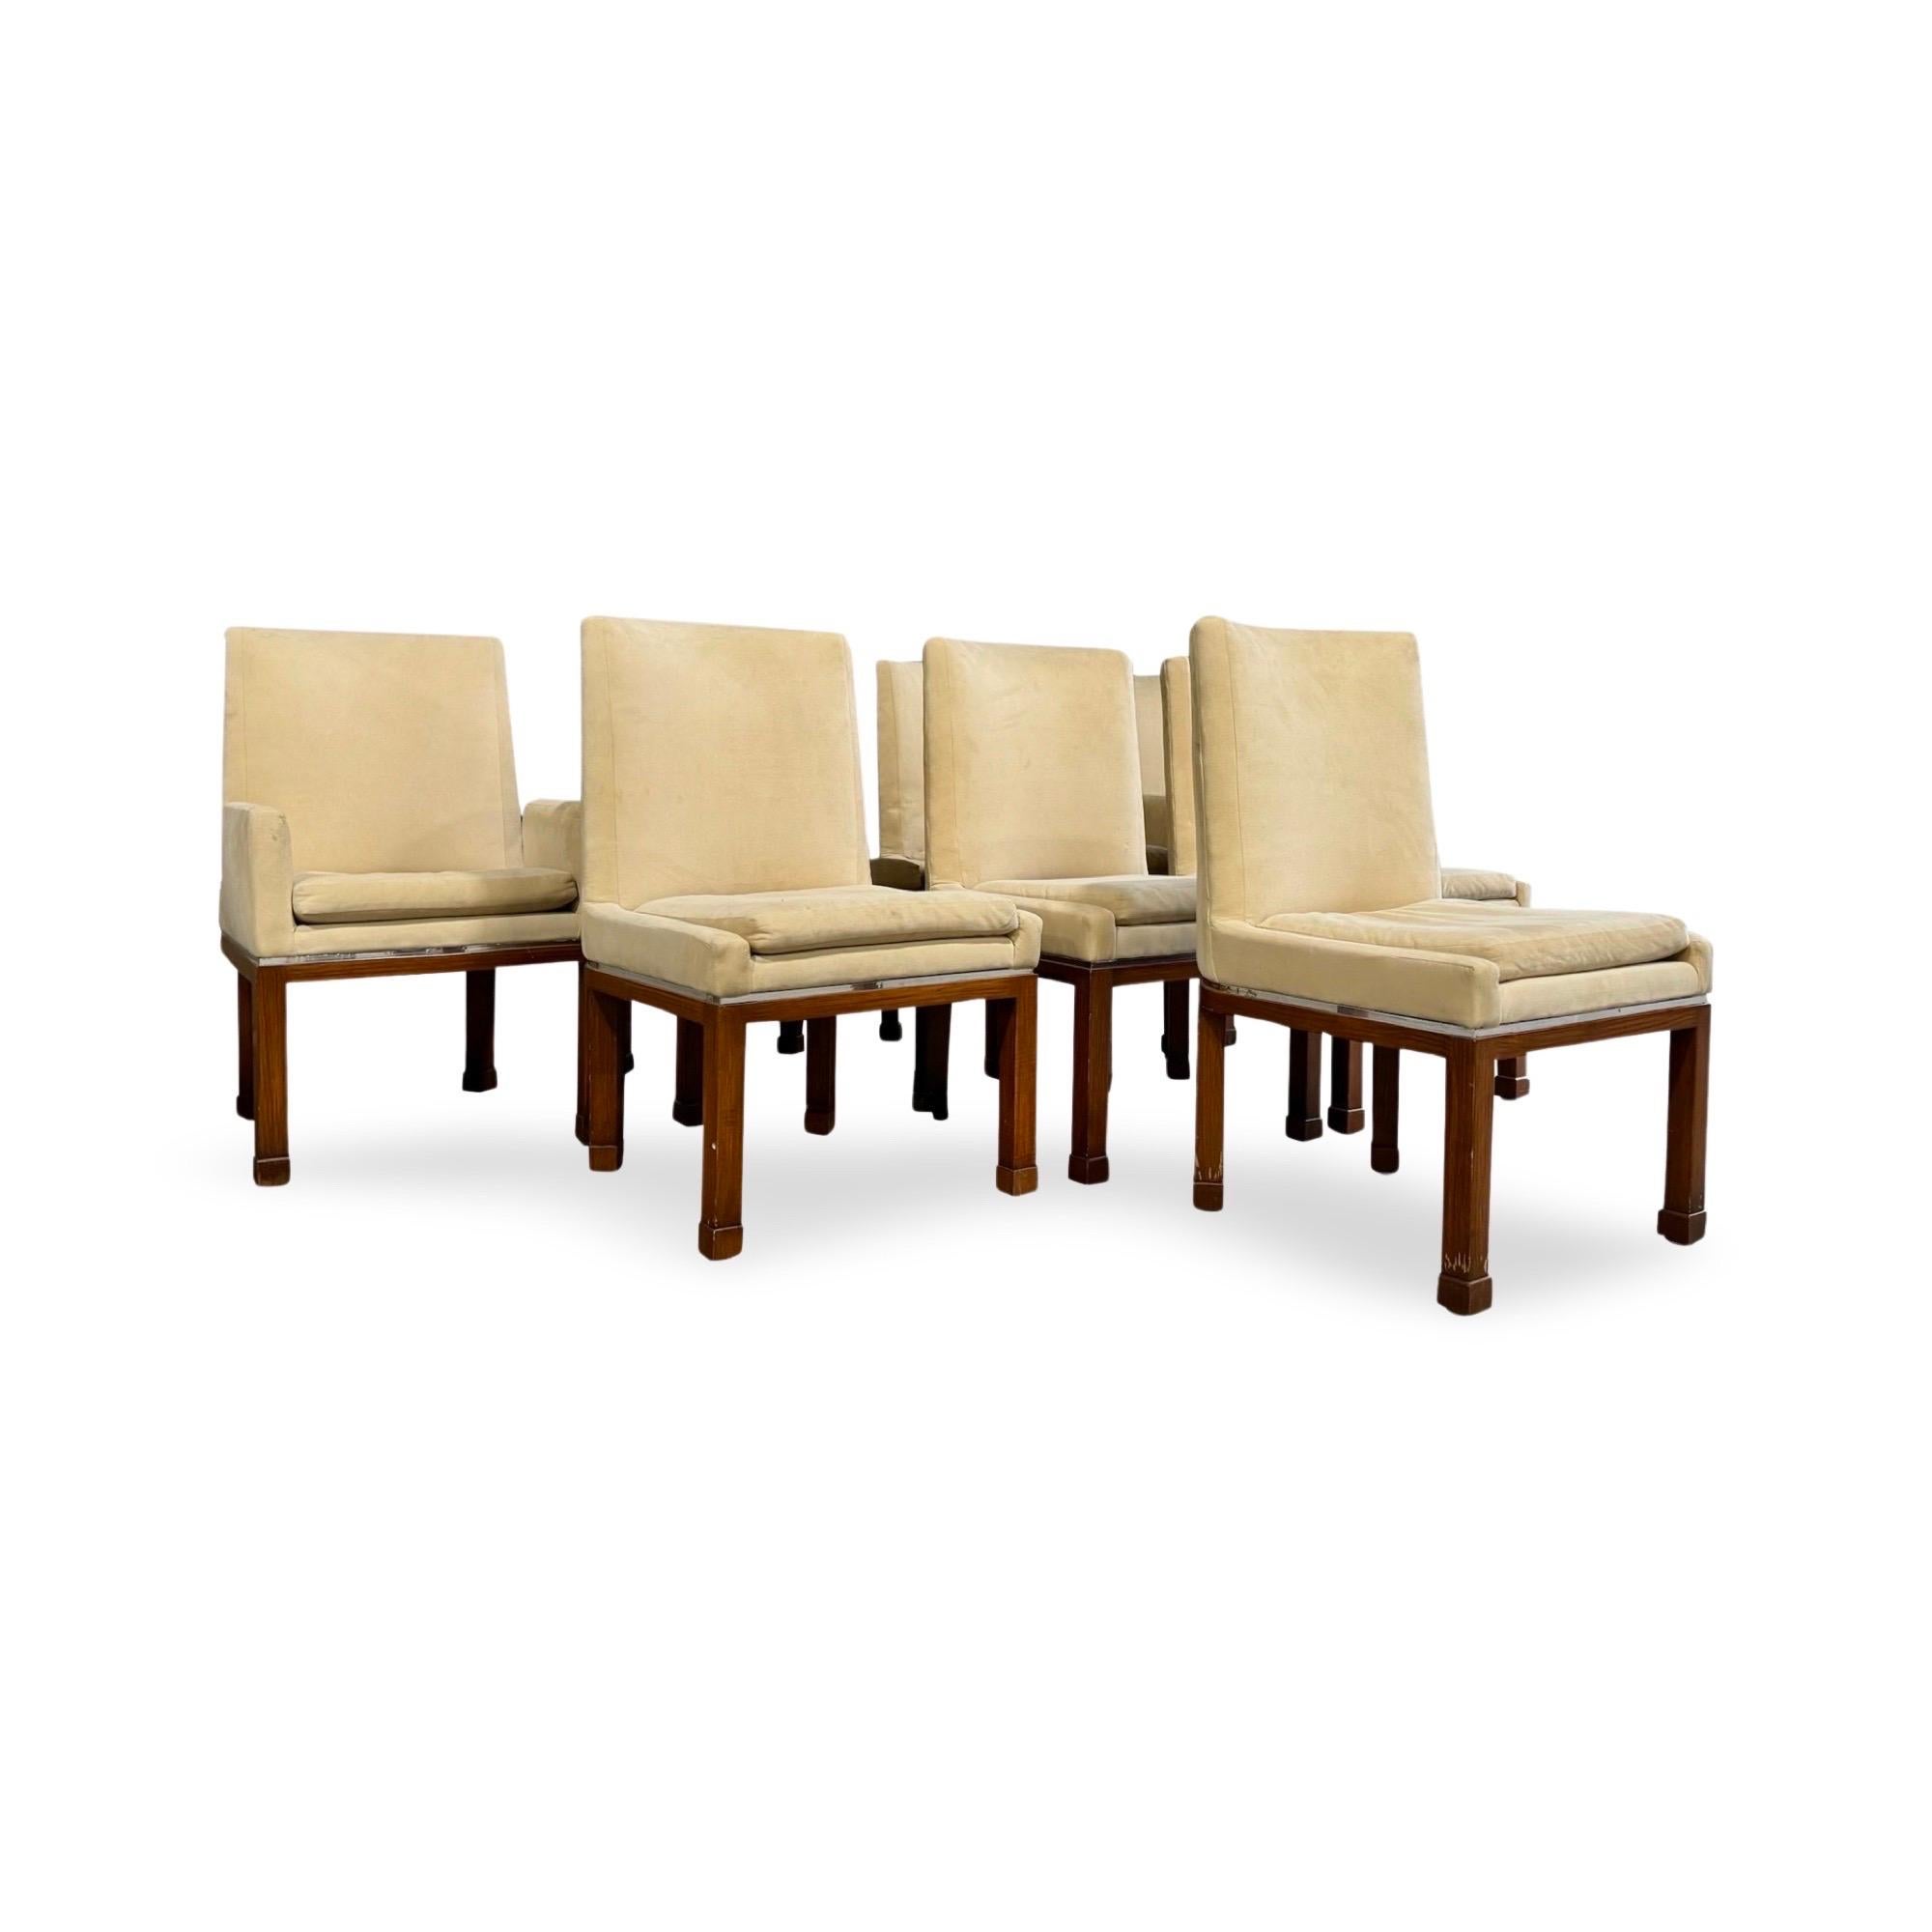 Vladimir Kagan Vintage Signed Dining Chairs, Set Of Eight c. 1970s For Sale 1